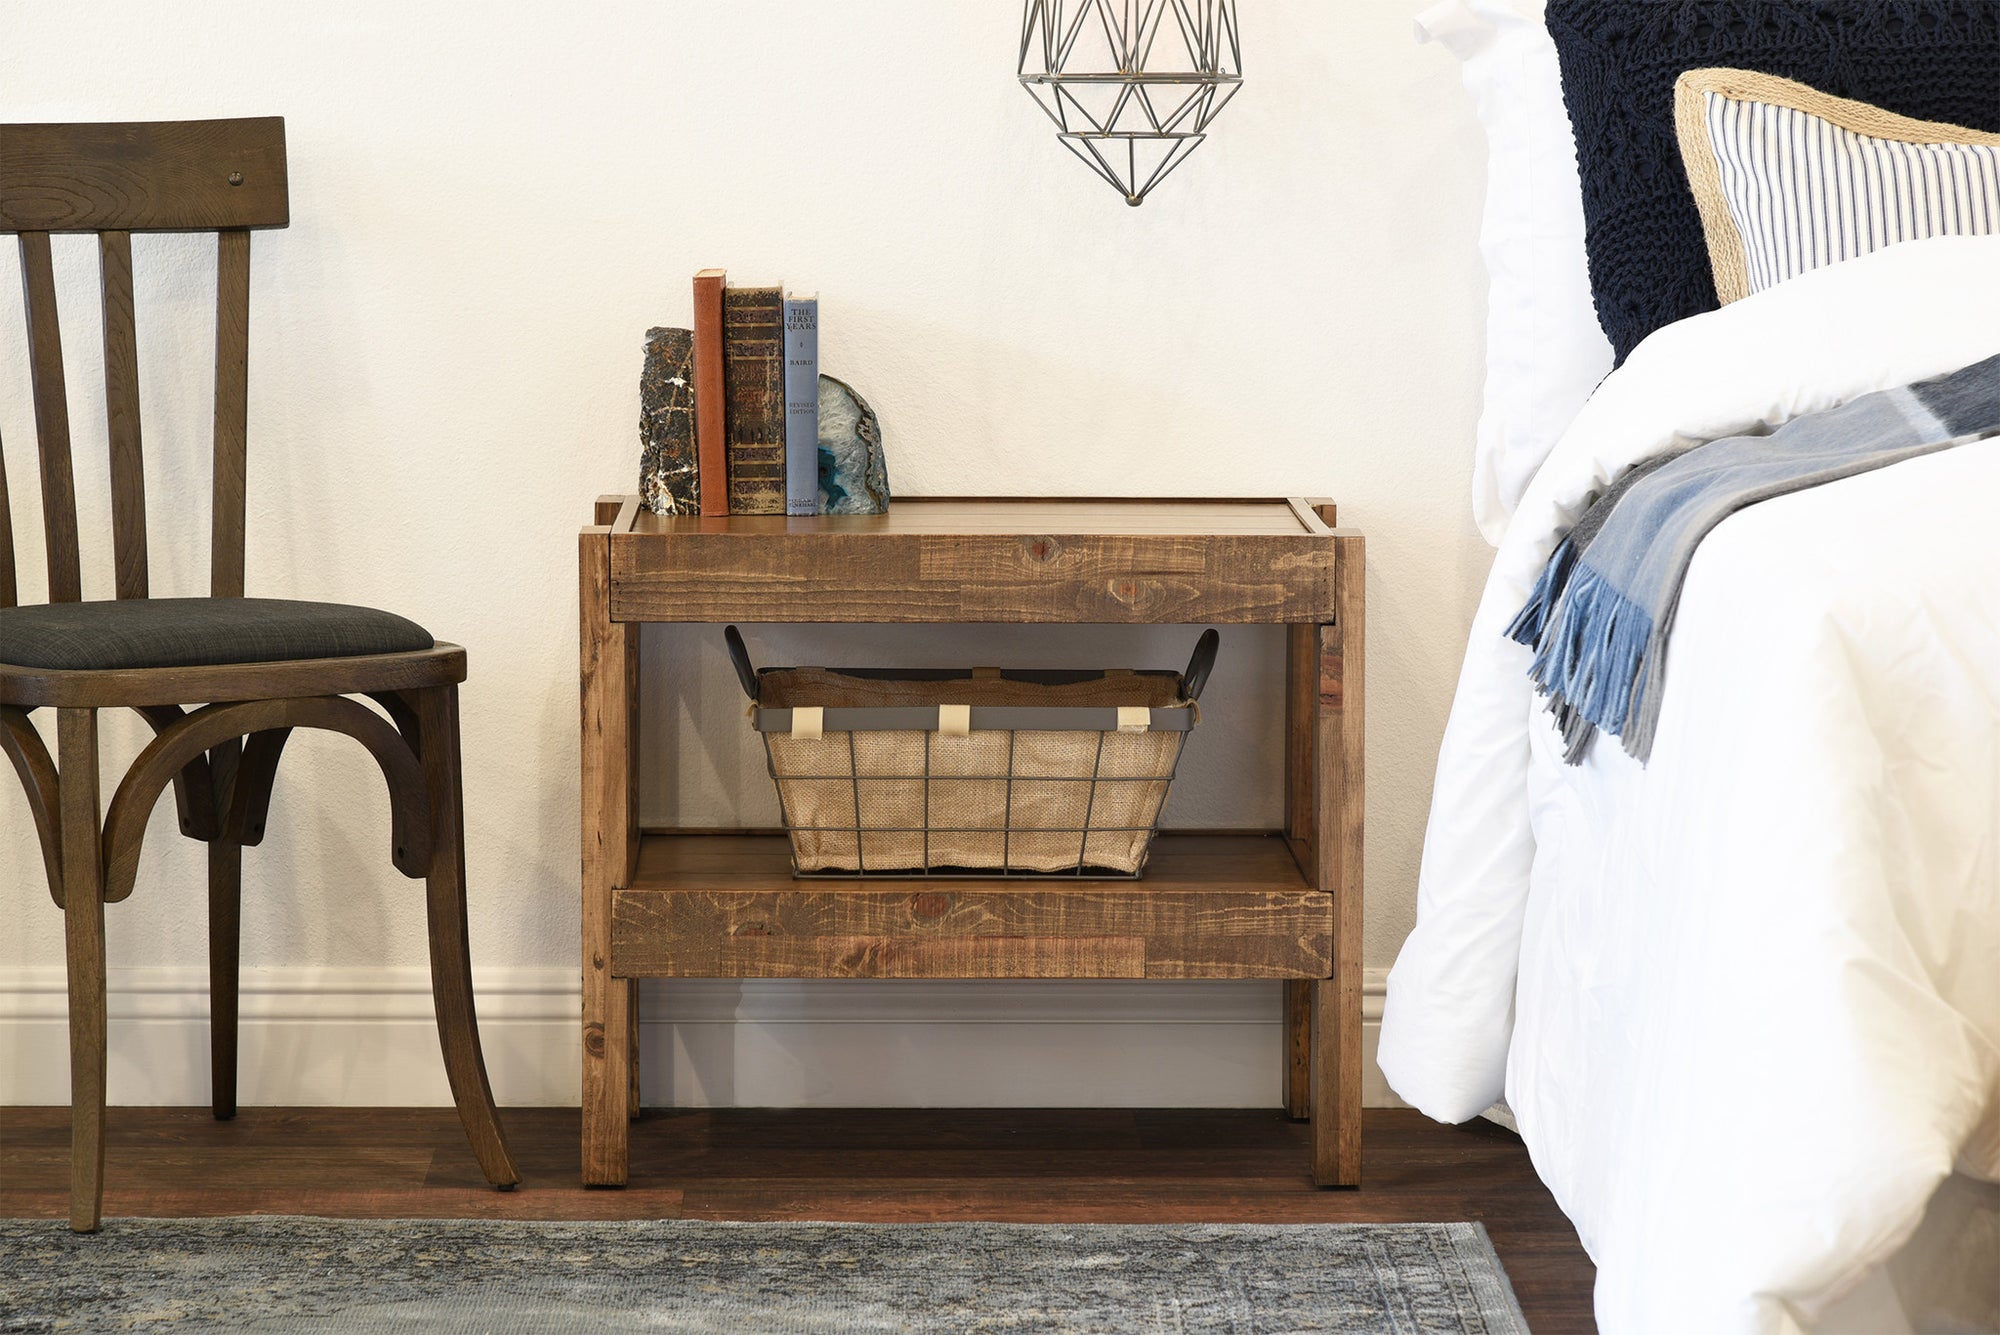 Reclaimed Rustic Farmhouse Pallet Wood Style End Table / Nightstand - presEARTH Spice